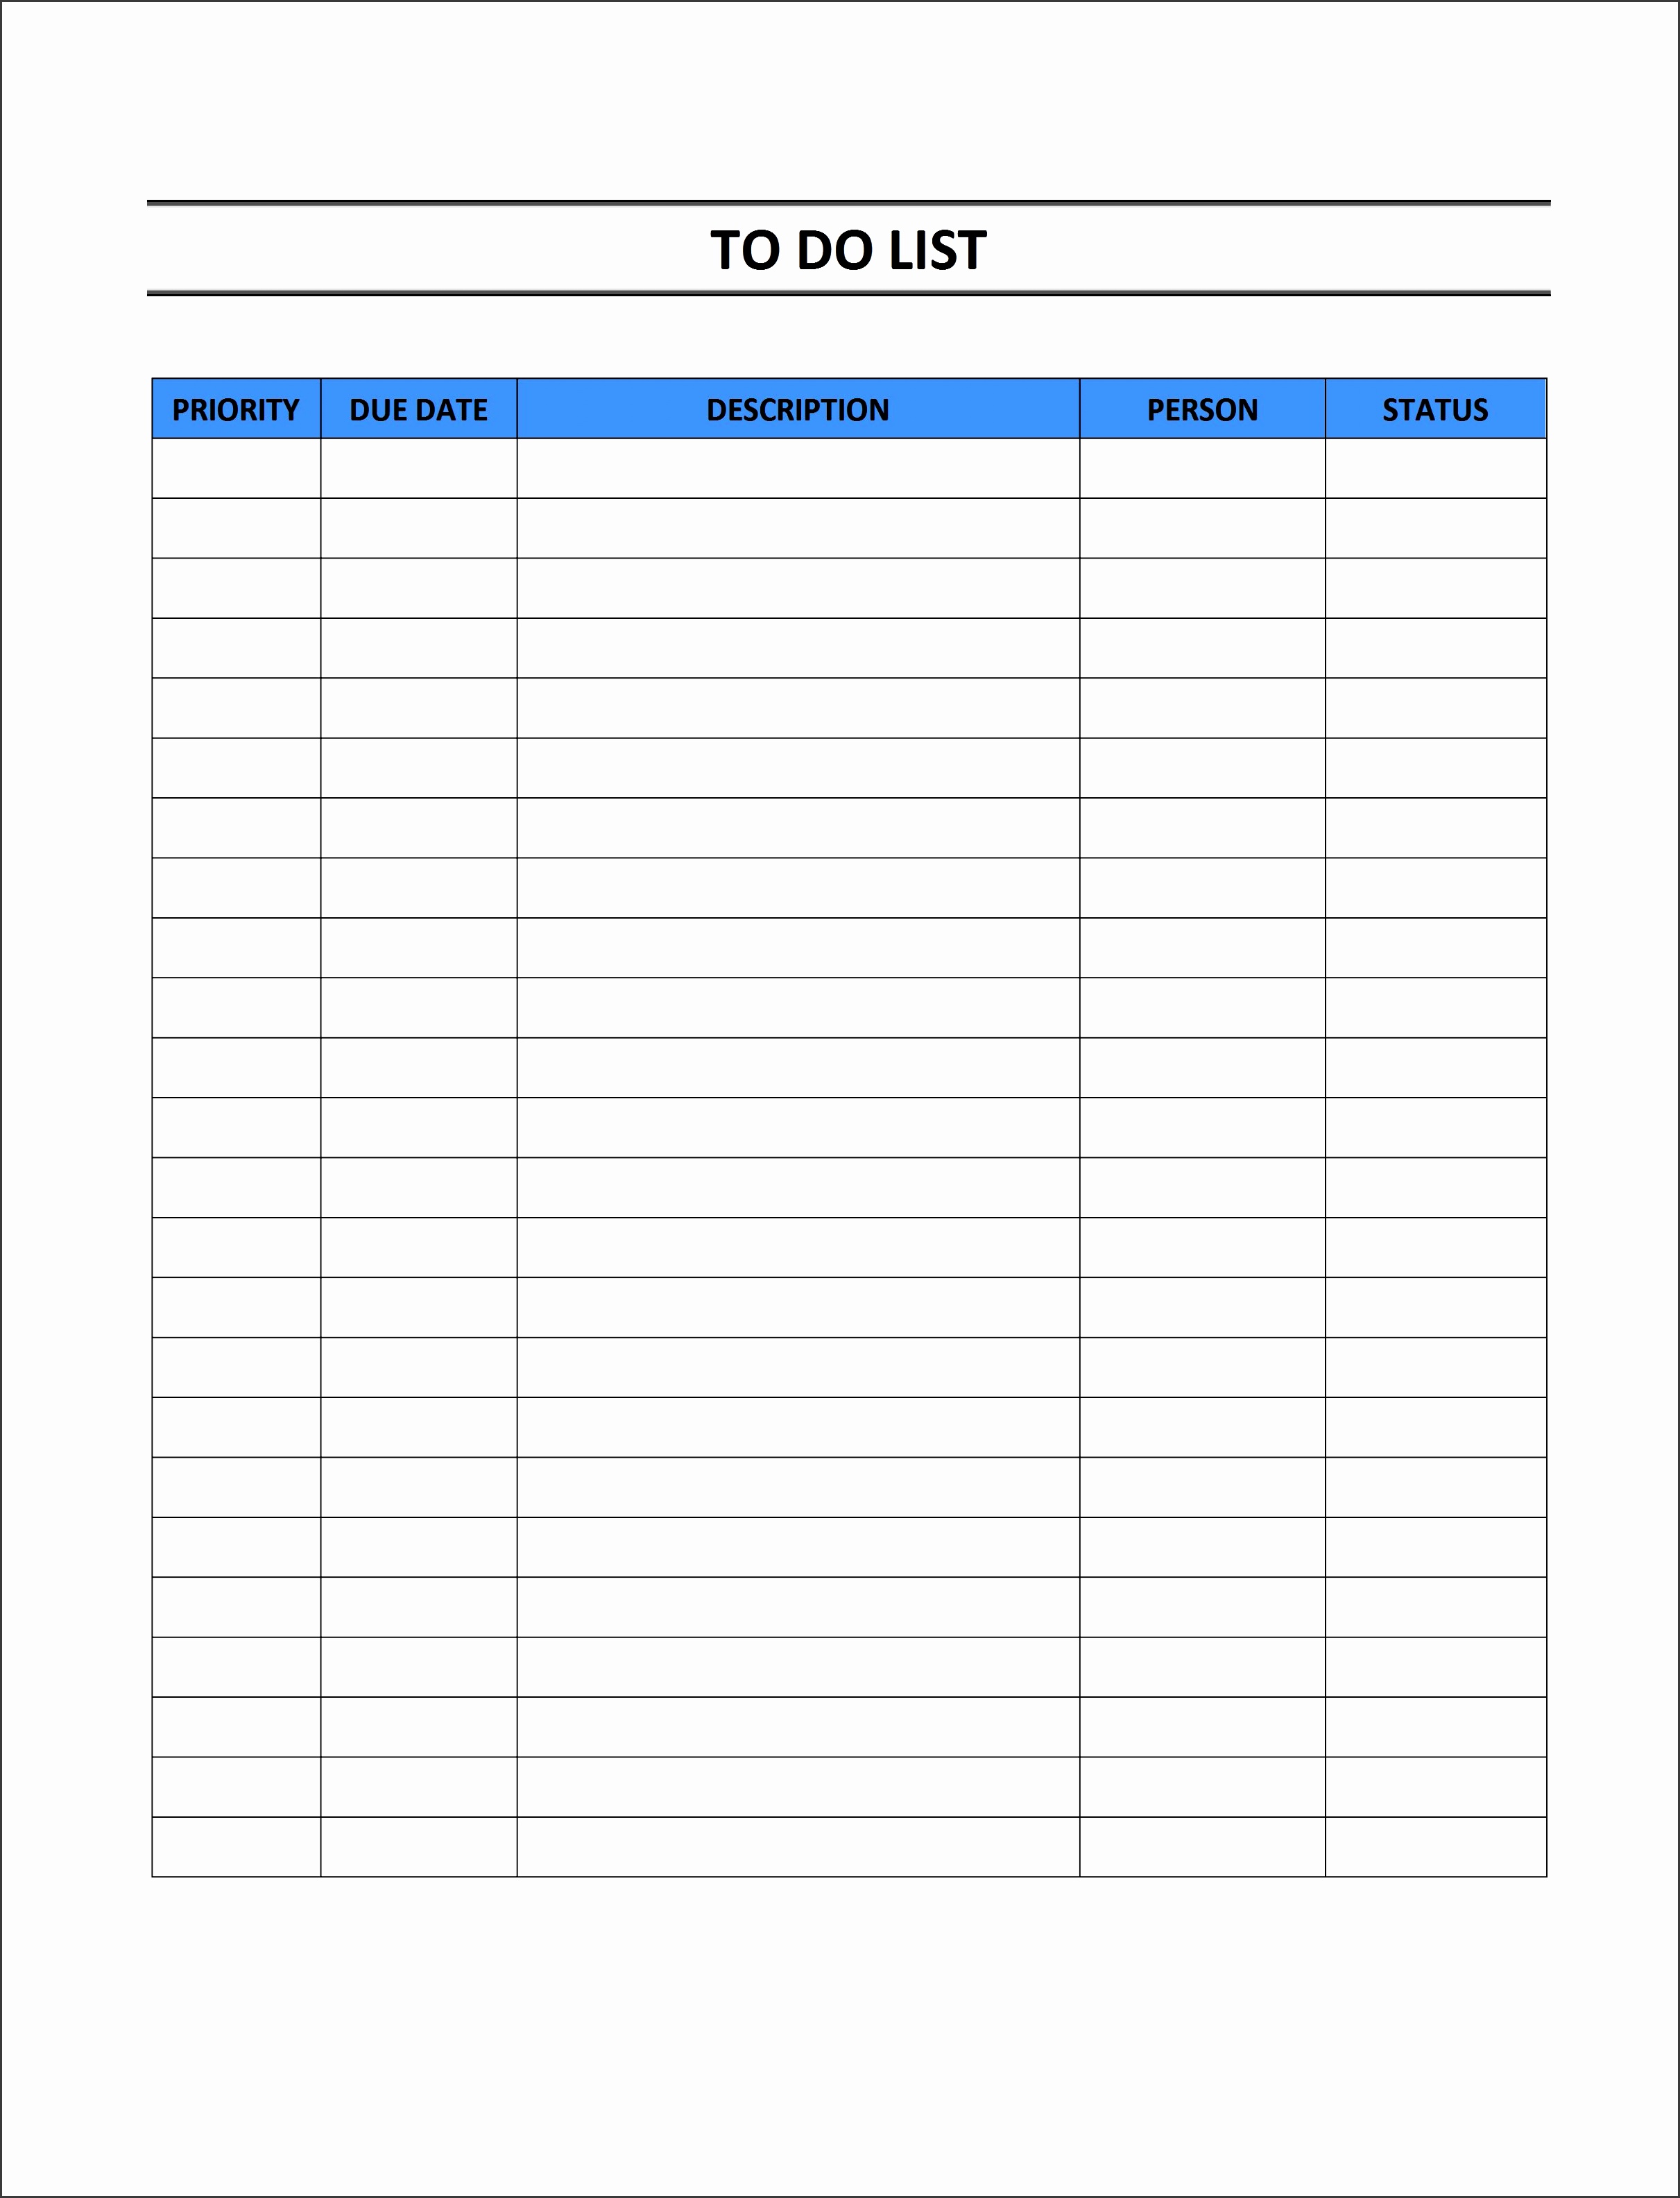 How Do I Make A Checklist Template In Word